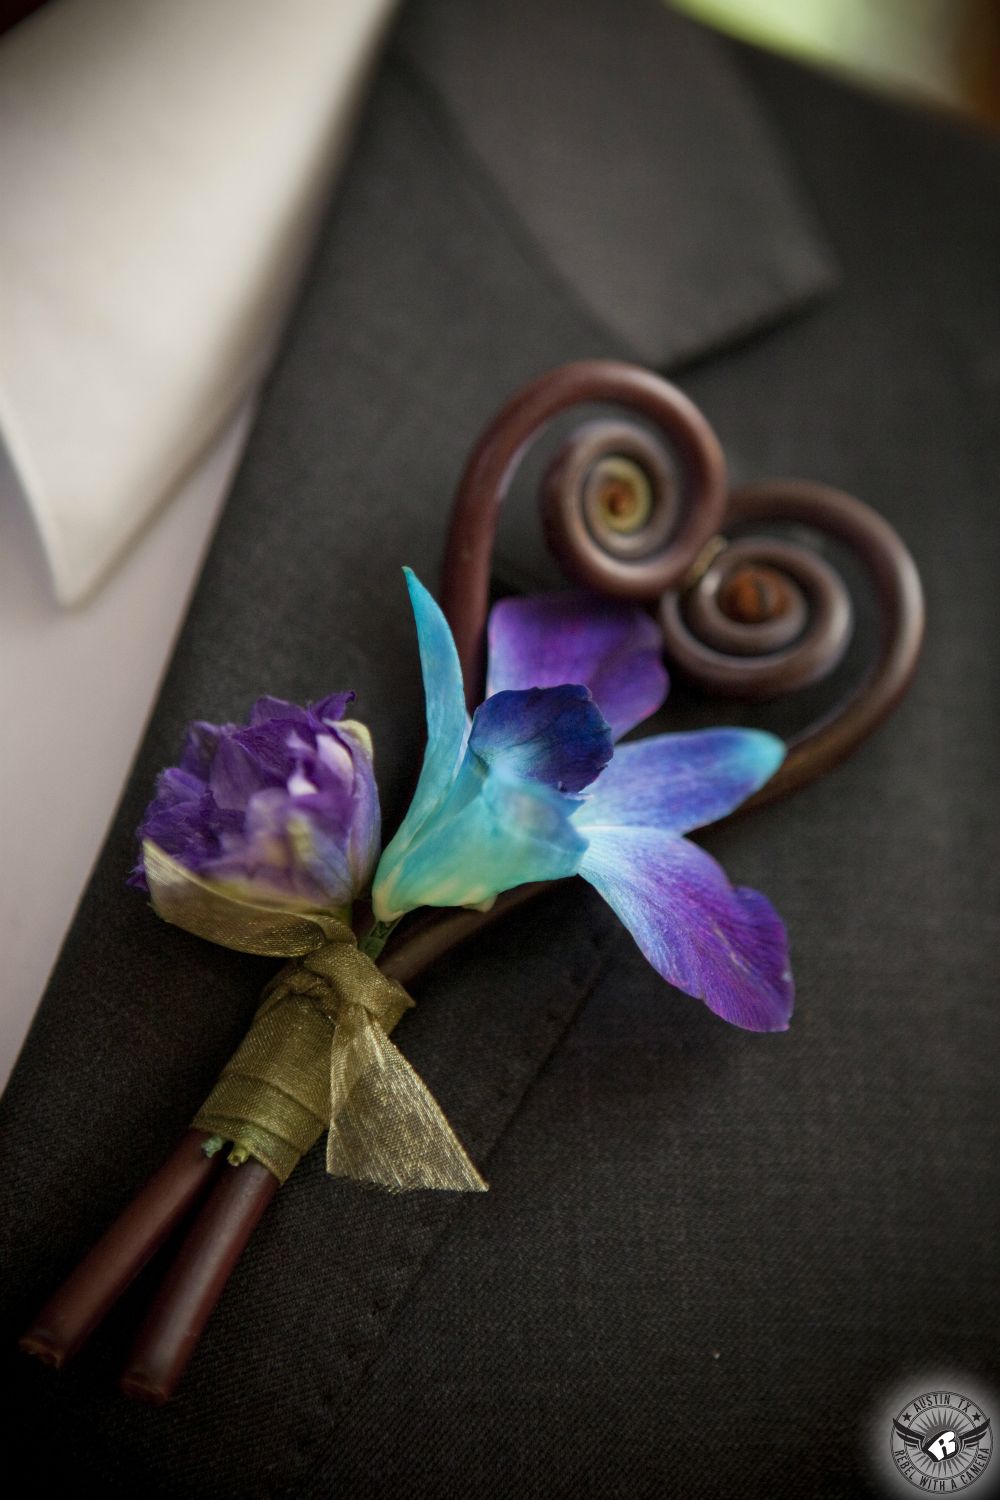 Austin wedding photography of heart shaped Monkey Tail and purple blue orchid groom's boutonniere by Zuzu's Petals at the Central Texas wedding venue, Kindred Oaks.